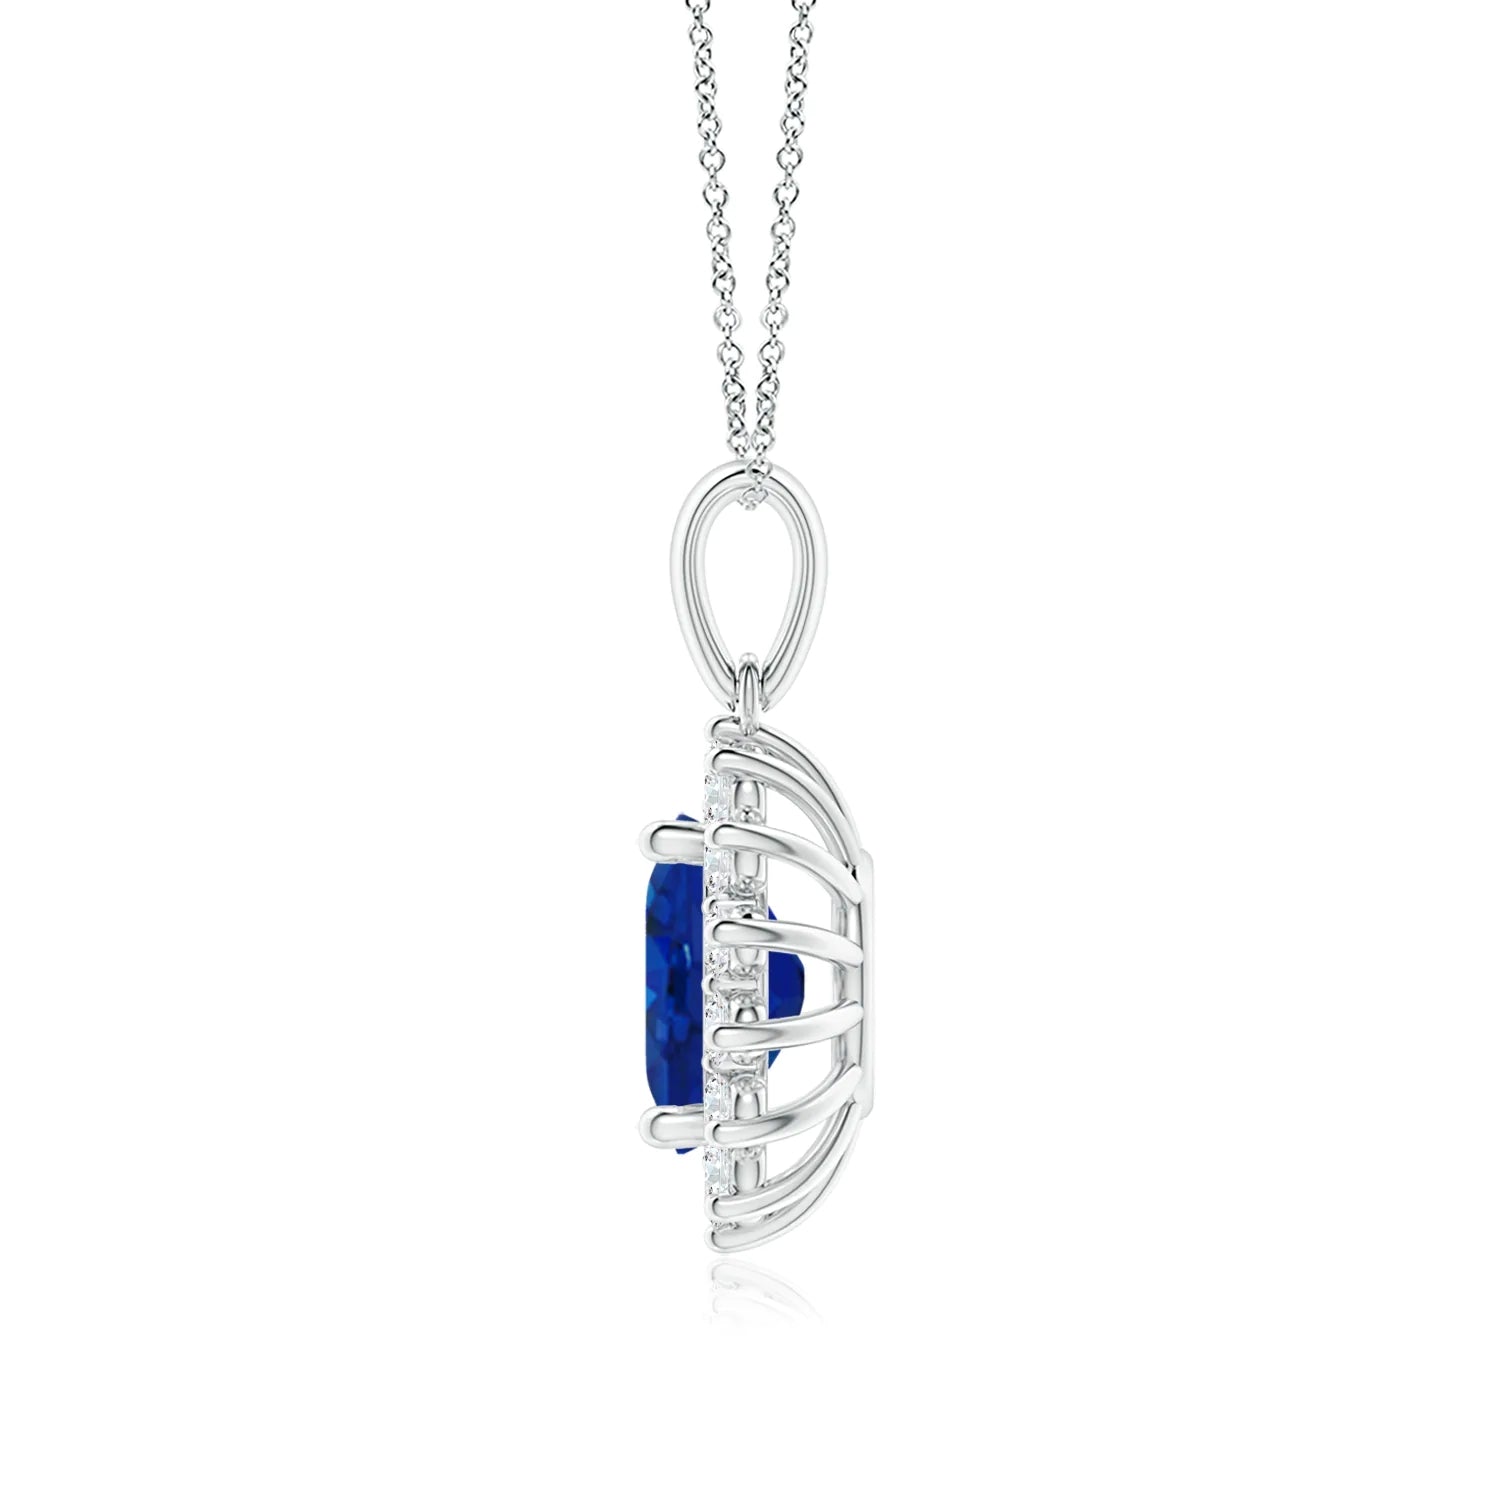 1.64 CT. Floral Halo Oval Sapphire Pendant